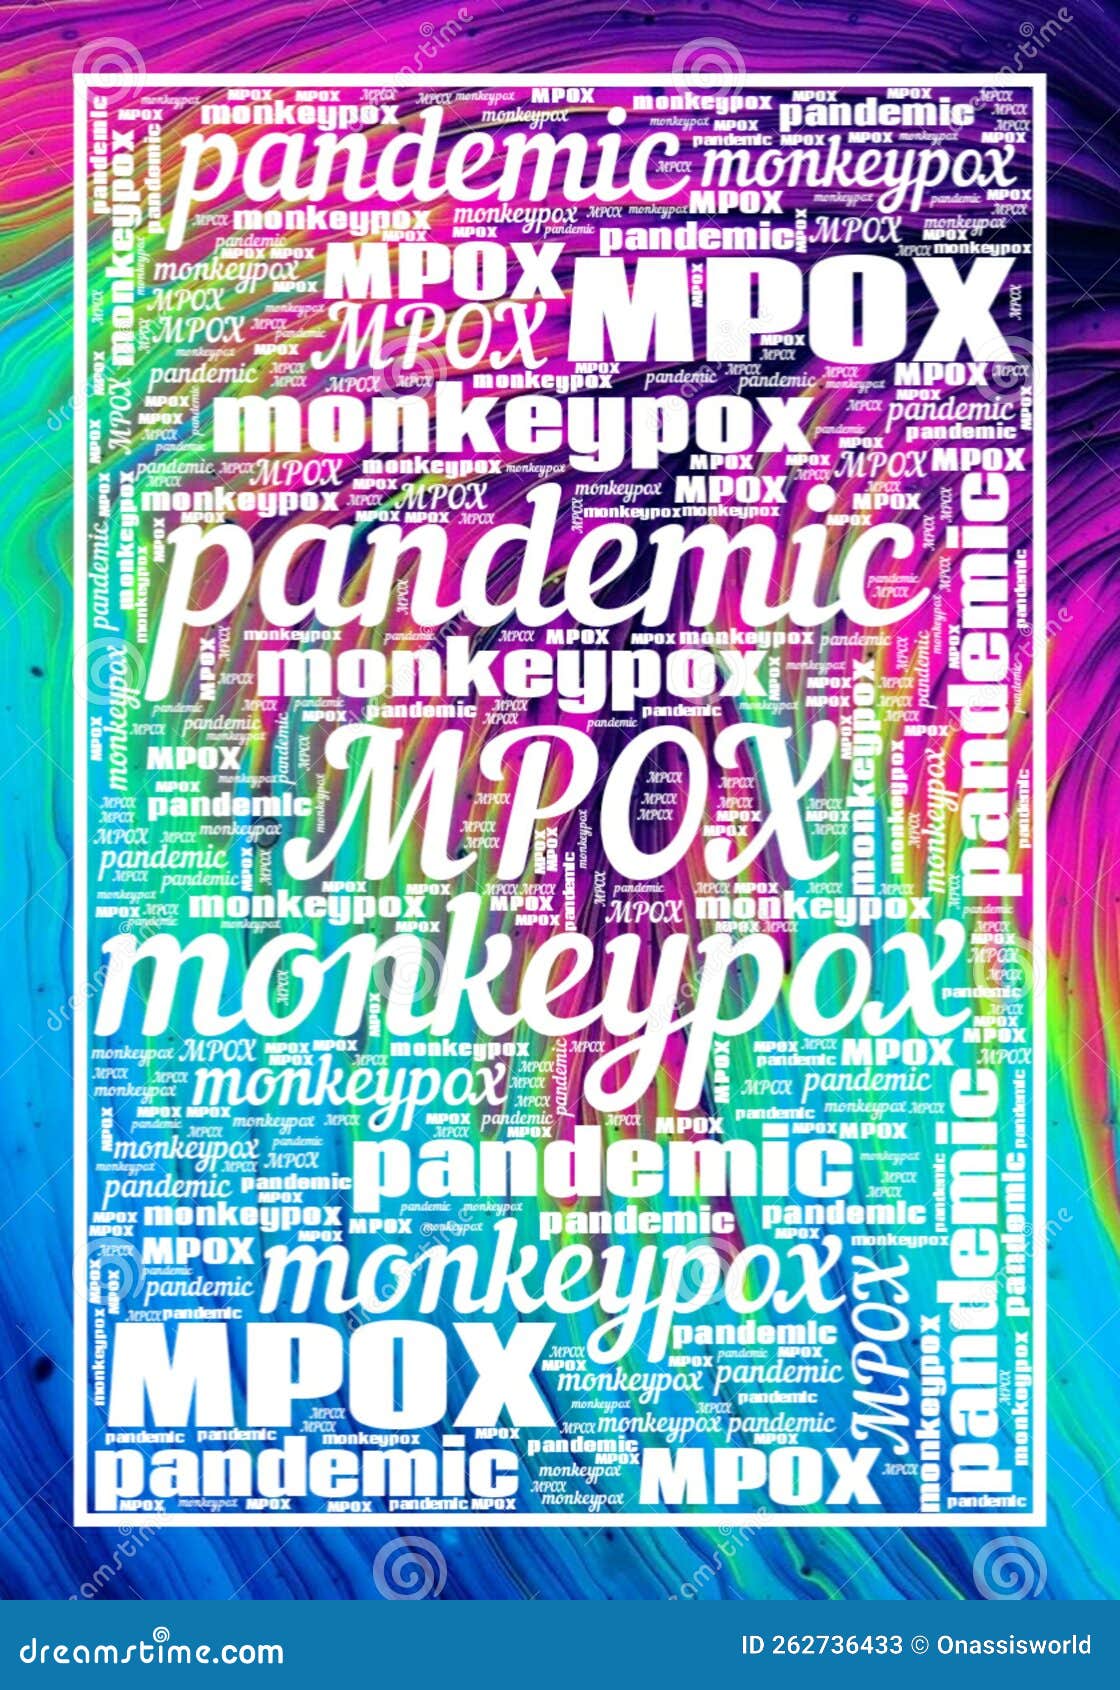 monkeypox mpox pandemic text abstract educational background 